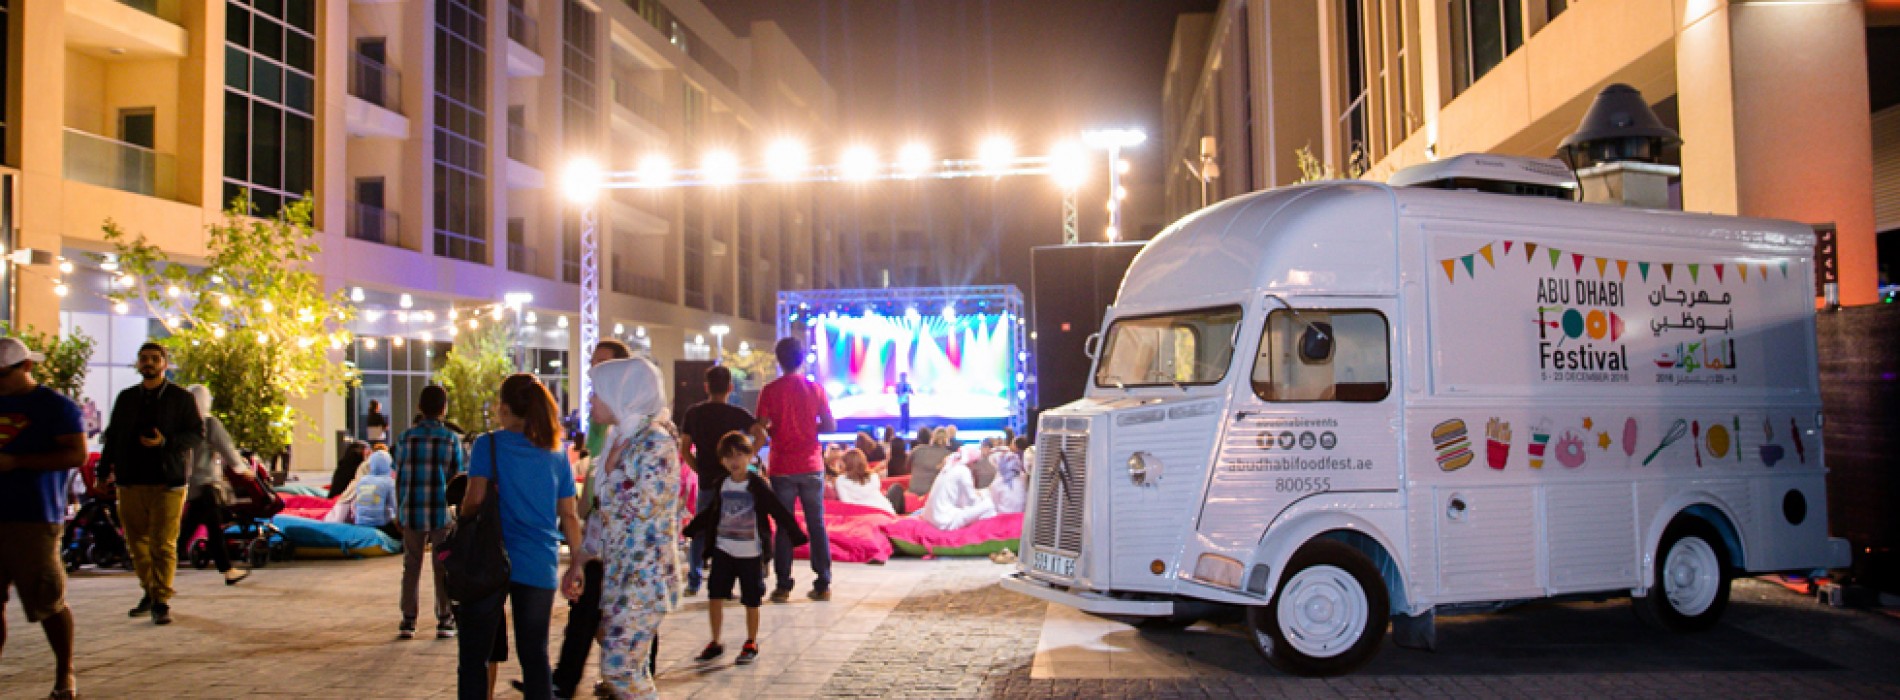 Abu Dhabi Food Festival 2016 inspired over 29,000 culinary enthusiasts across the capital